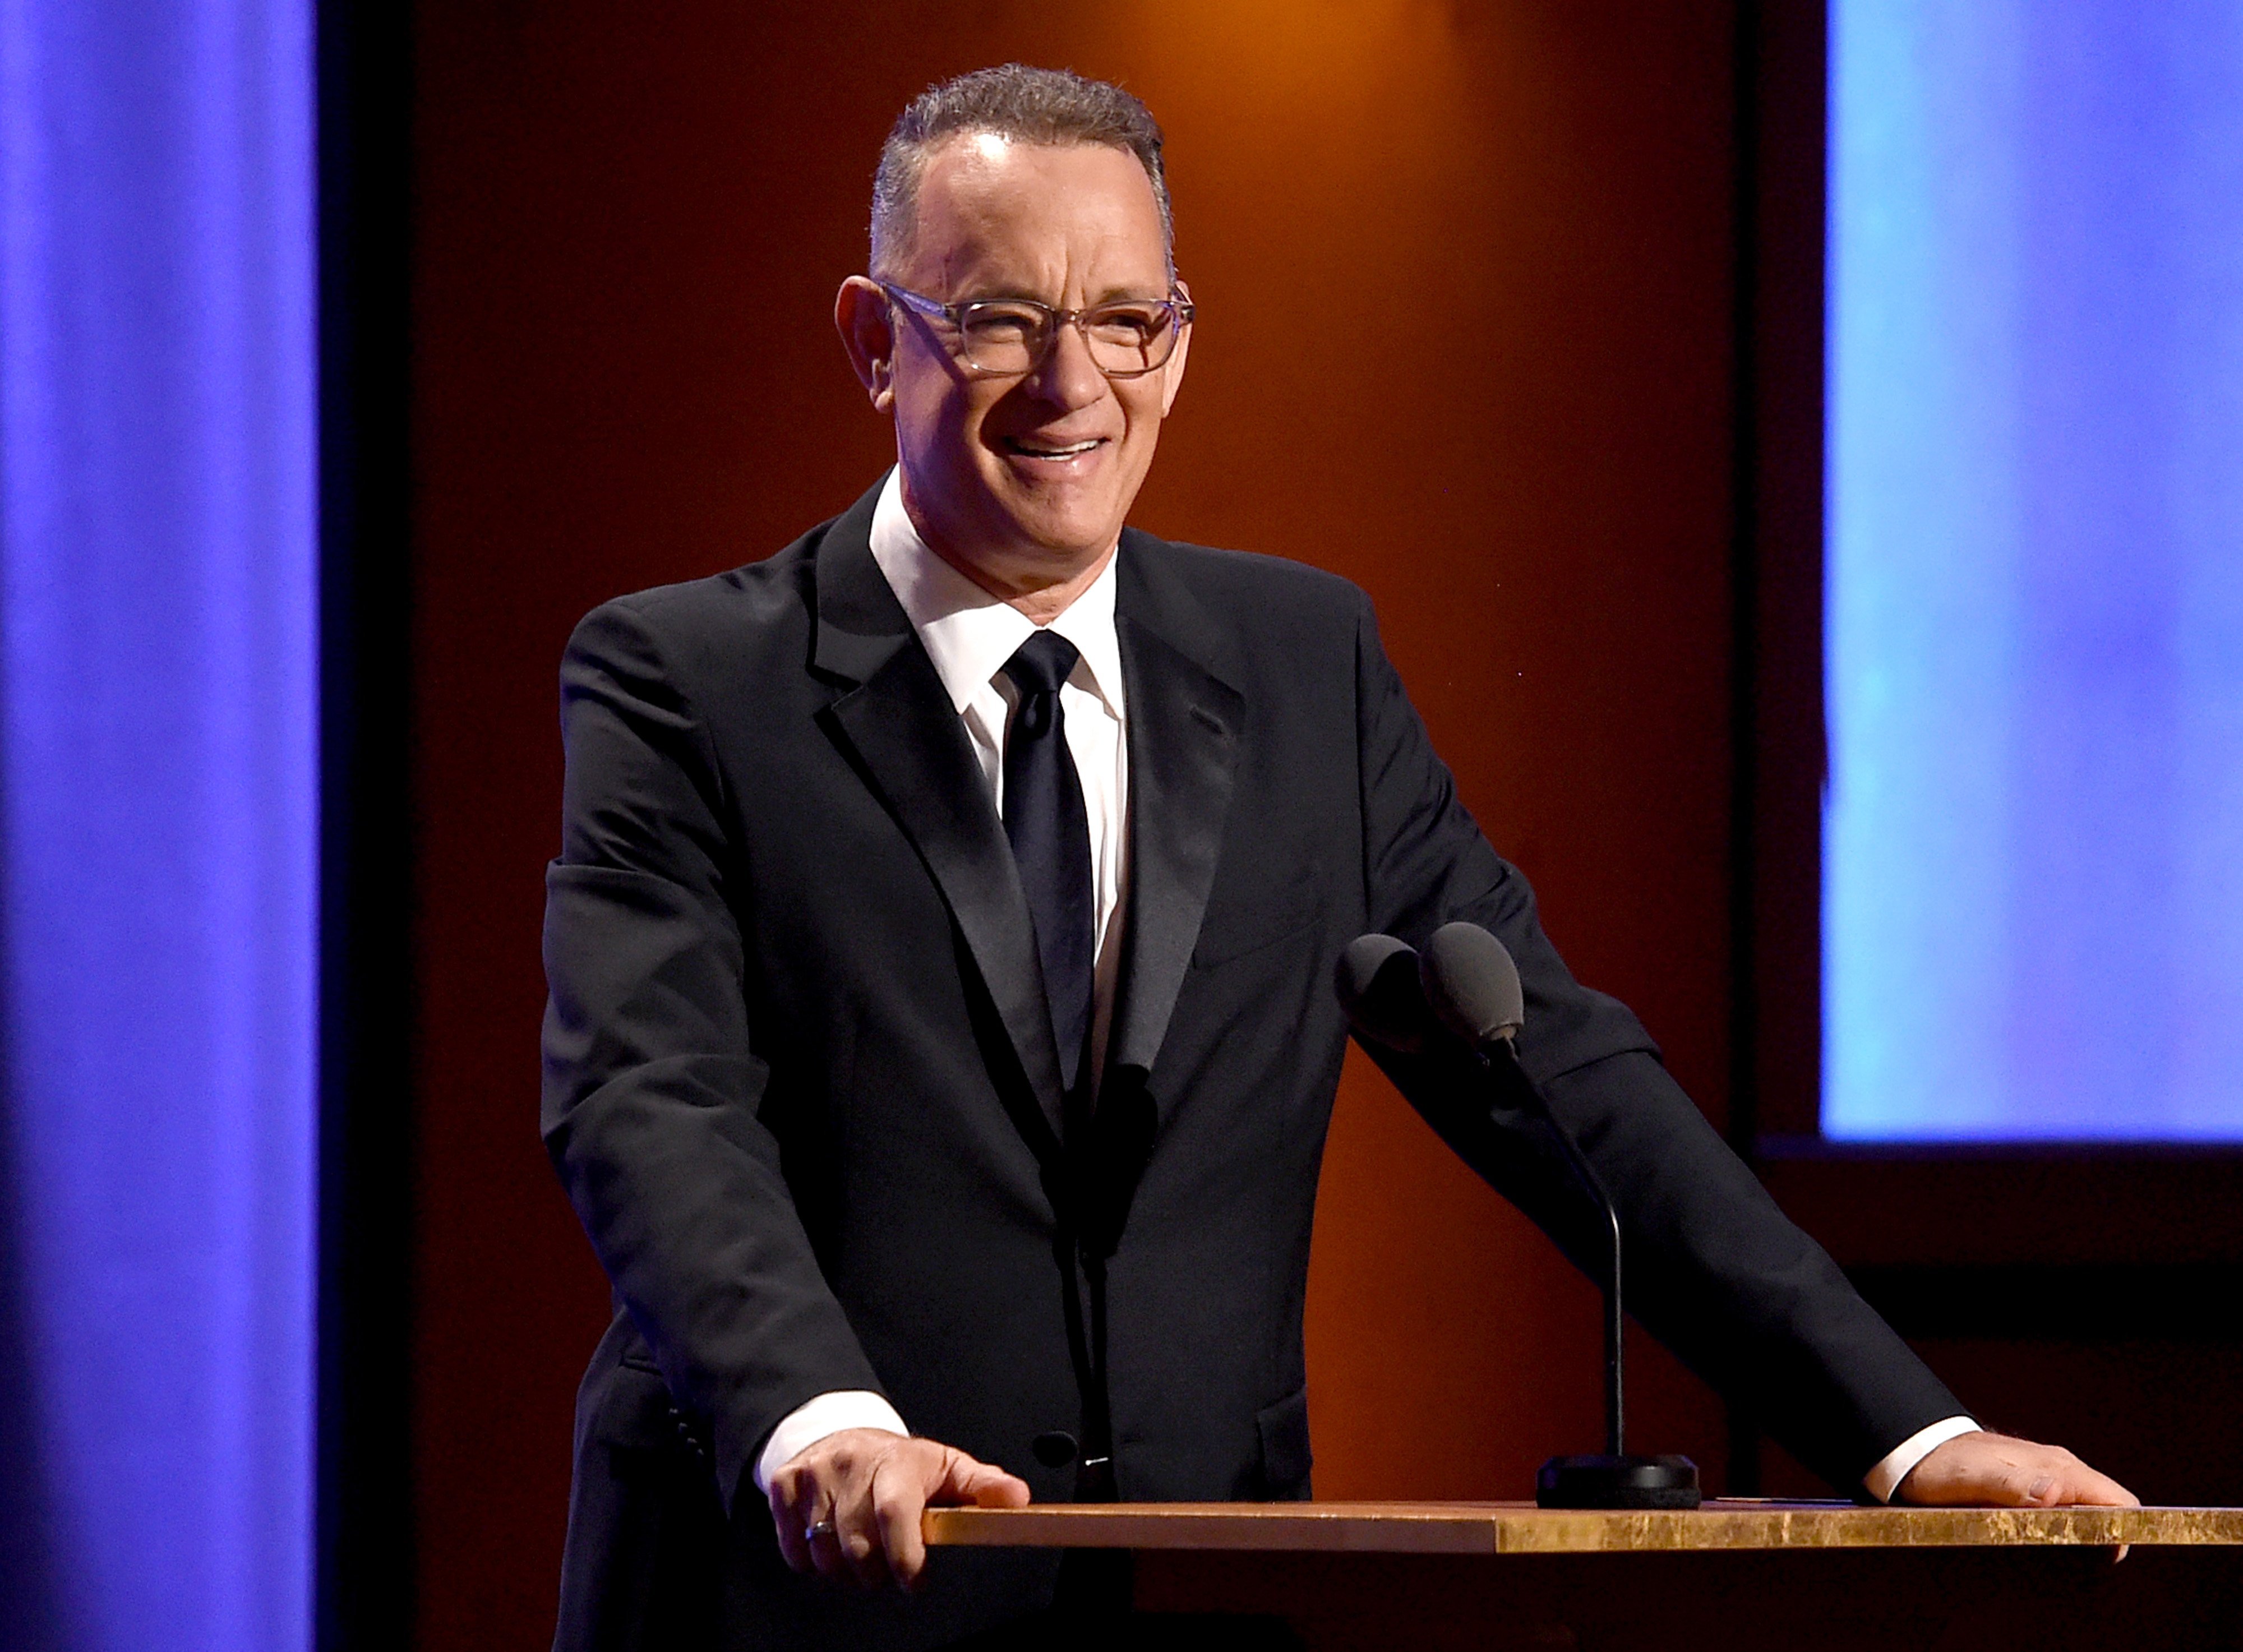  Tom Hanks speaks onstage during the Academy of Motion Picture Arts and Sciences' 10th annual Governors Awards on November 18, 2018, in Hollywood, California. | Source: Getty Images.